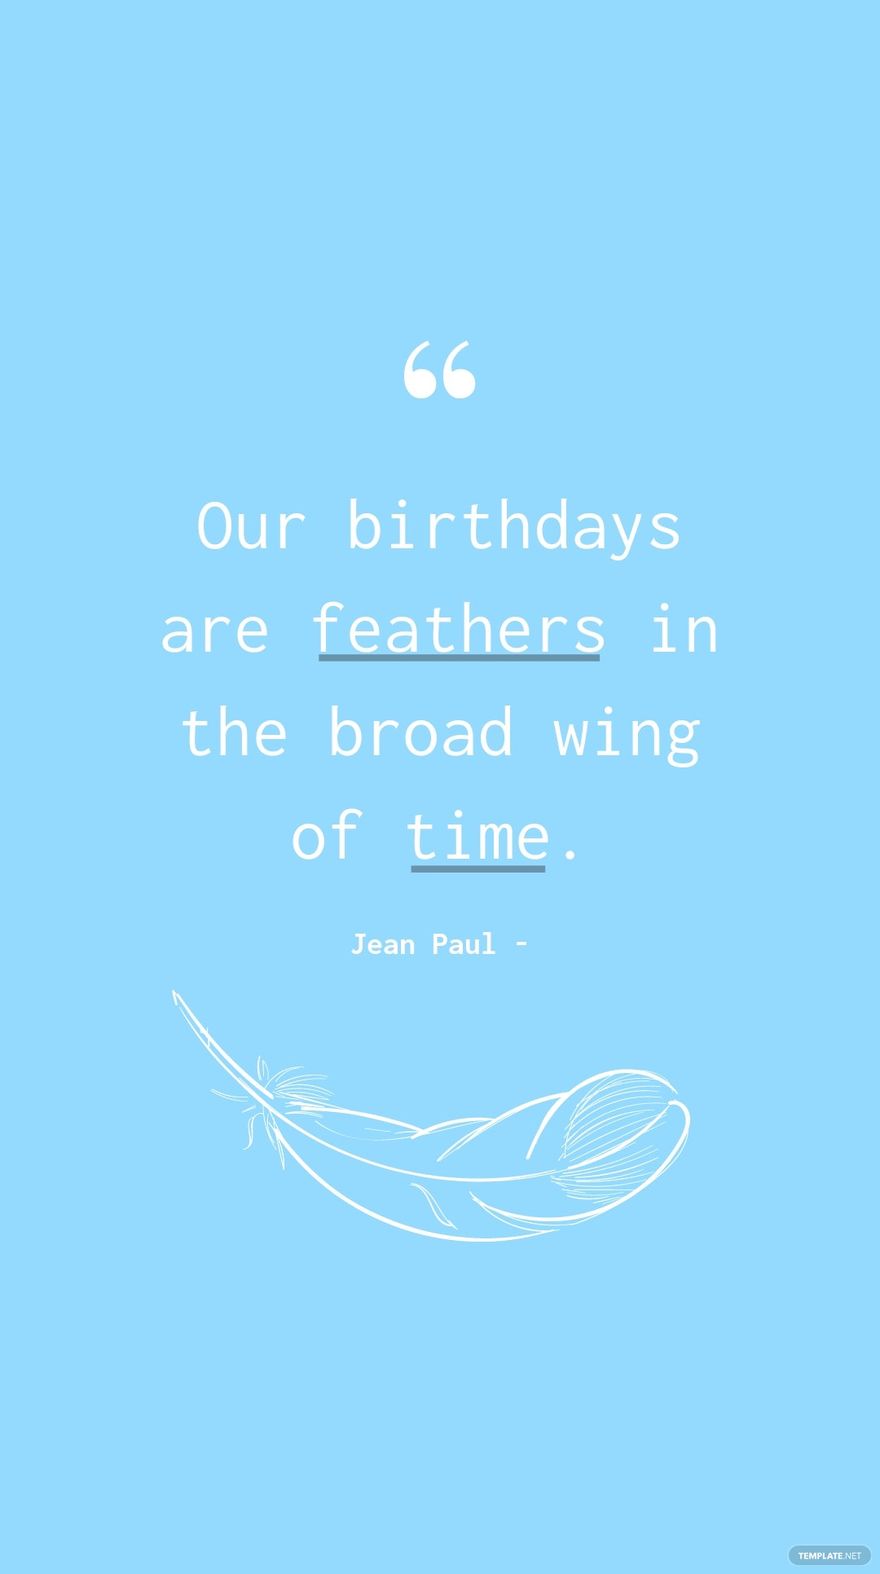 Jean Paul - Our birthdays are feathers in the broad wing of time.